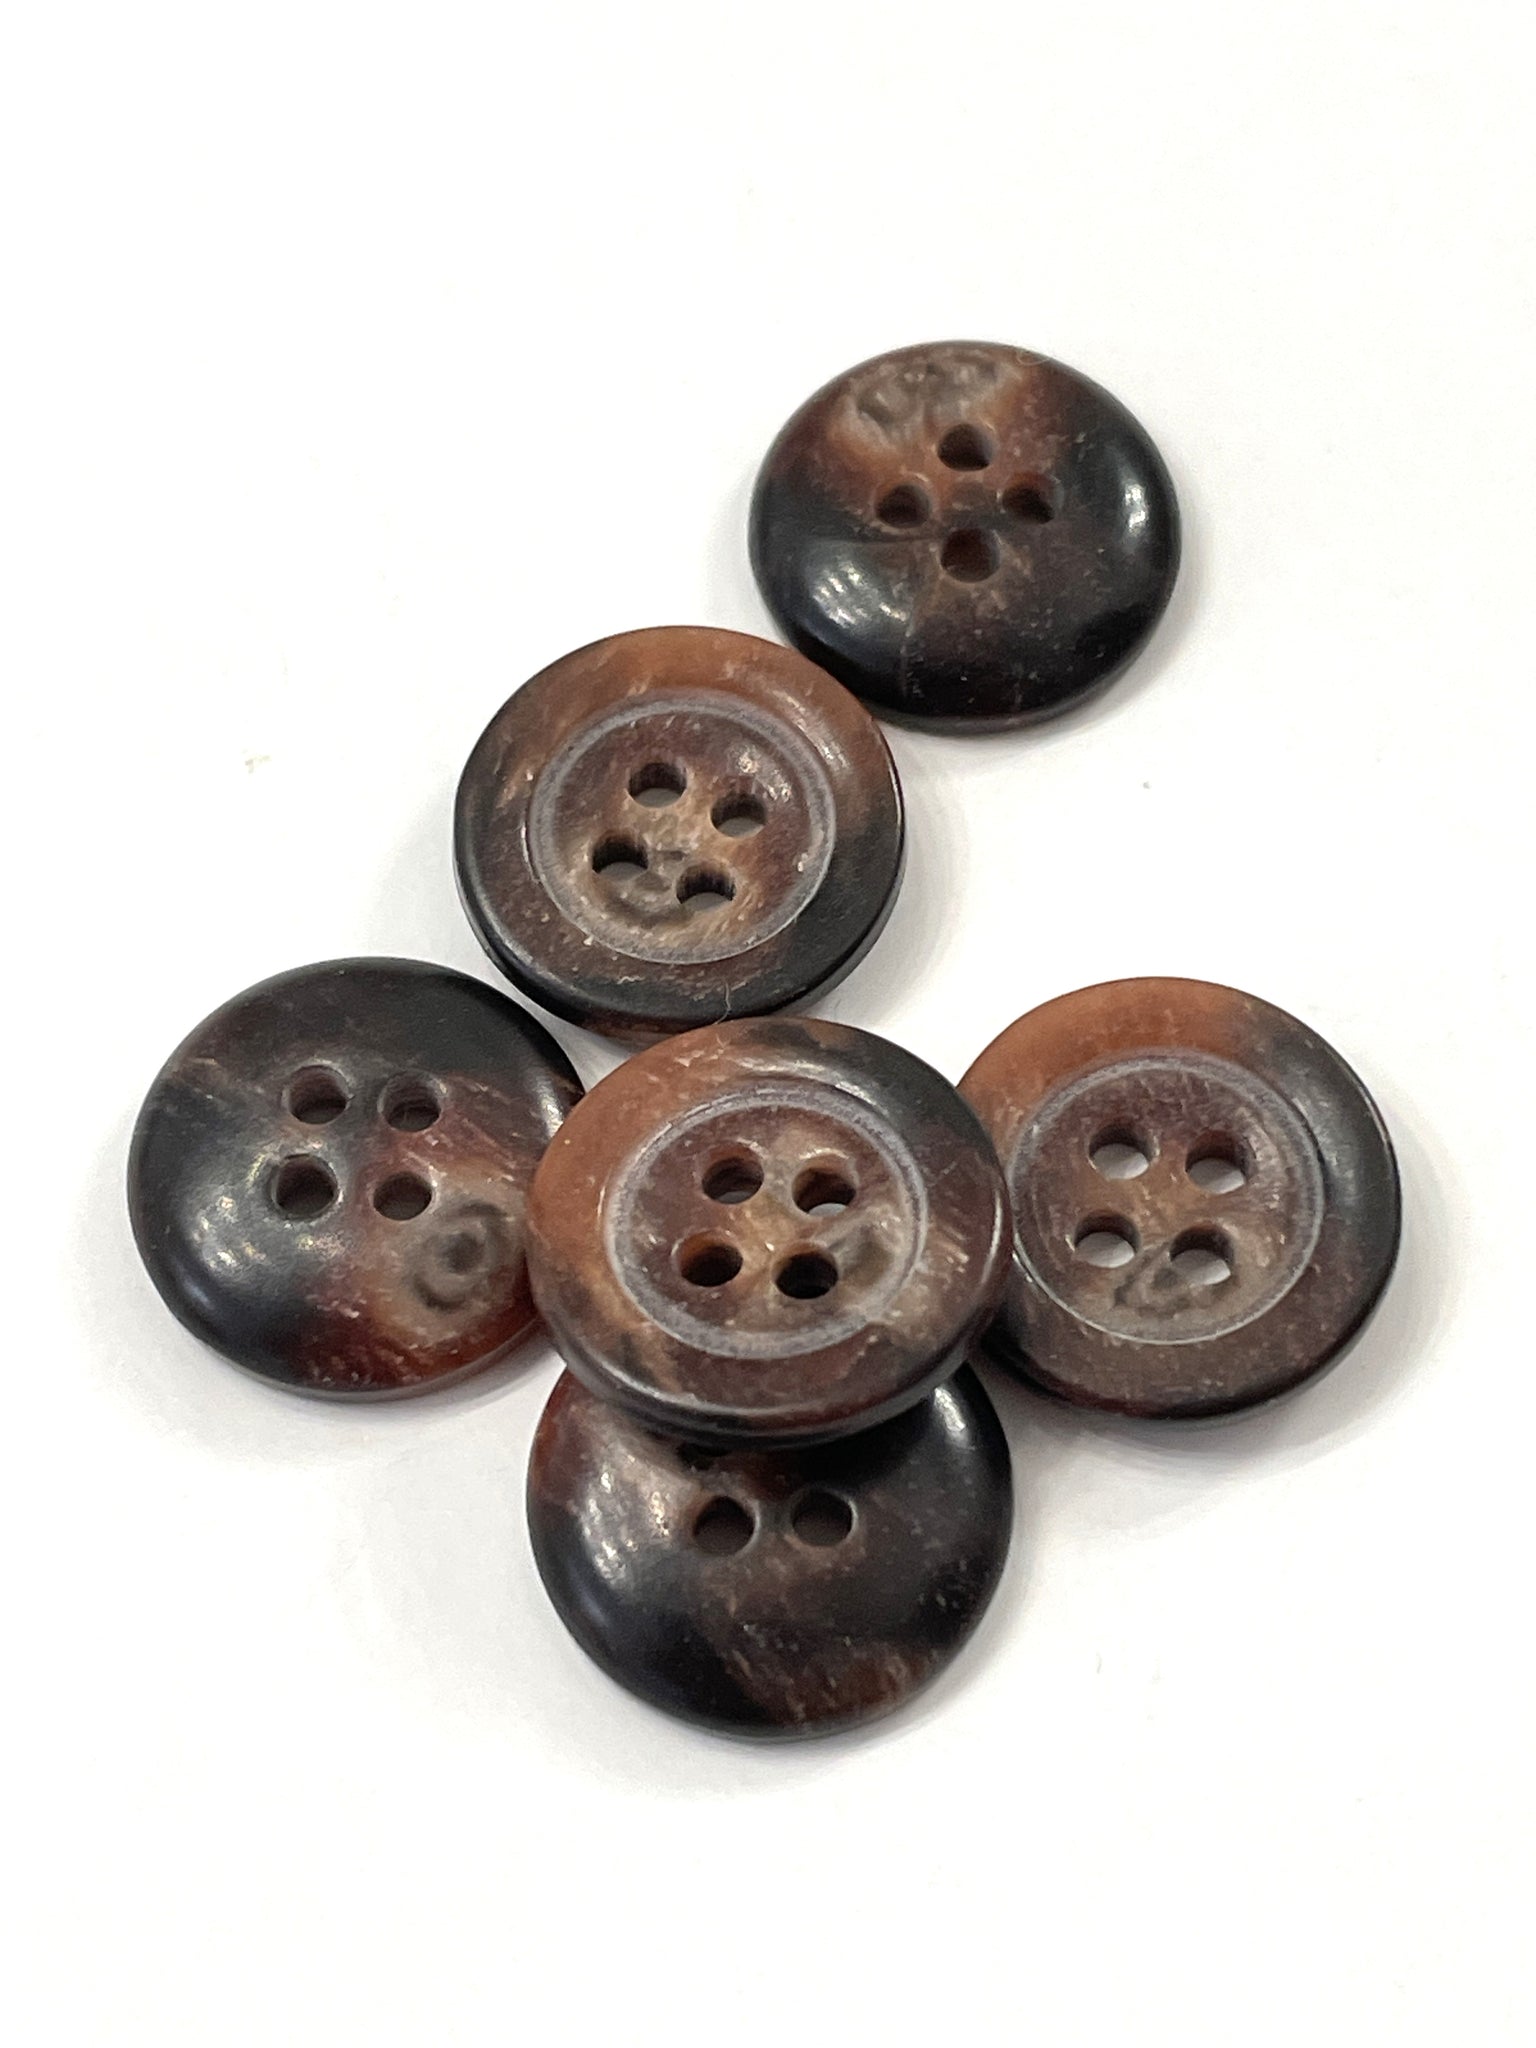 Buttons 4 Hole Plastic Set of 6 - Mottled Brown